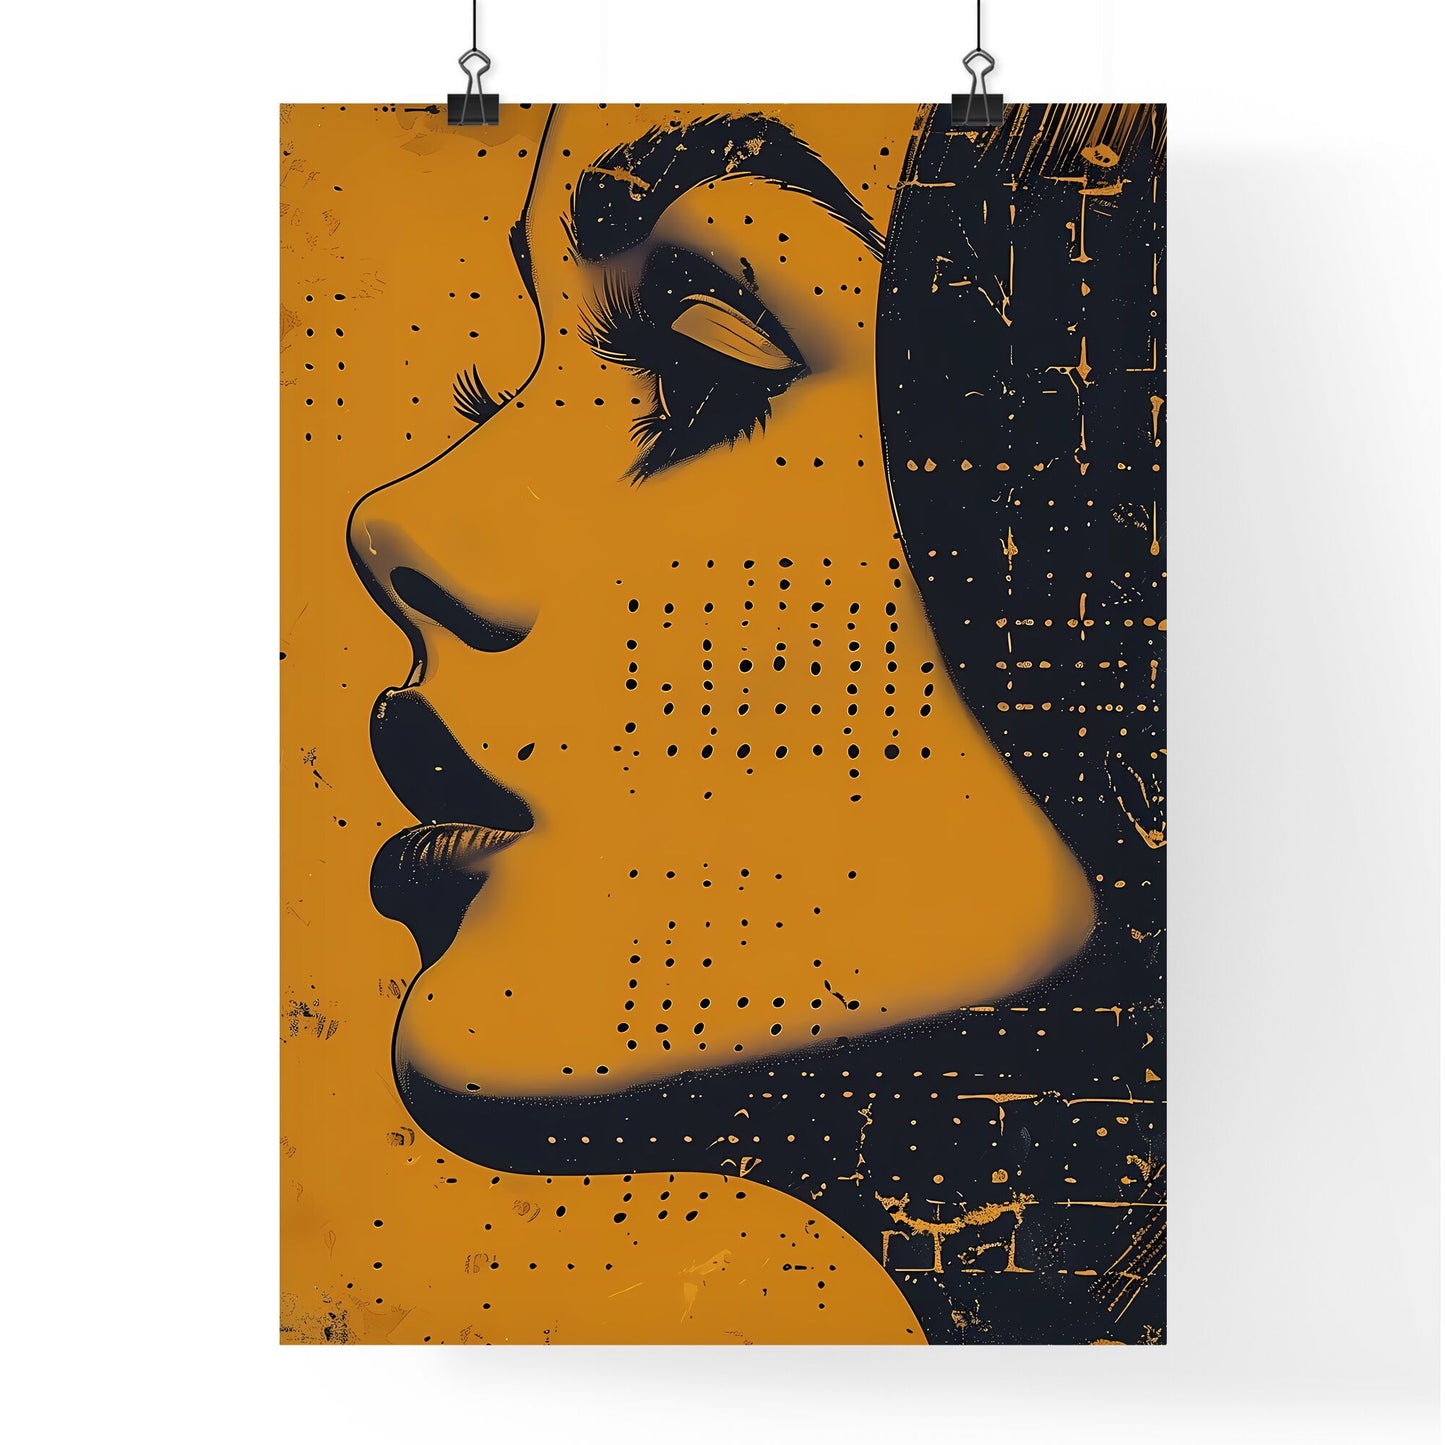 Comic Strip Style Artwork of a Retro 1970s woman with unique facial features, kissing a man, showcasing vibrant halftone texture and grainy yellow and black tones Default Title